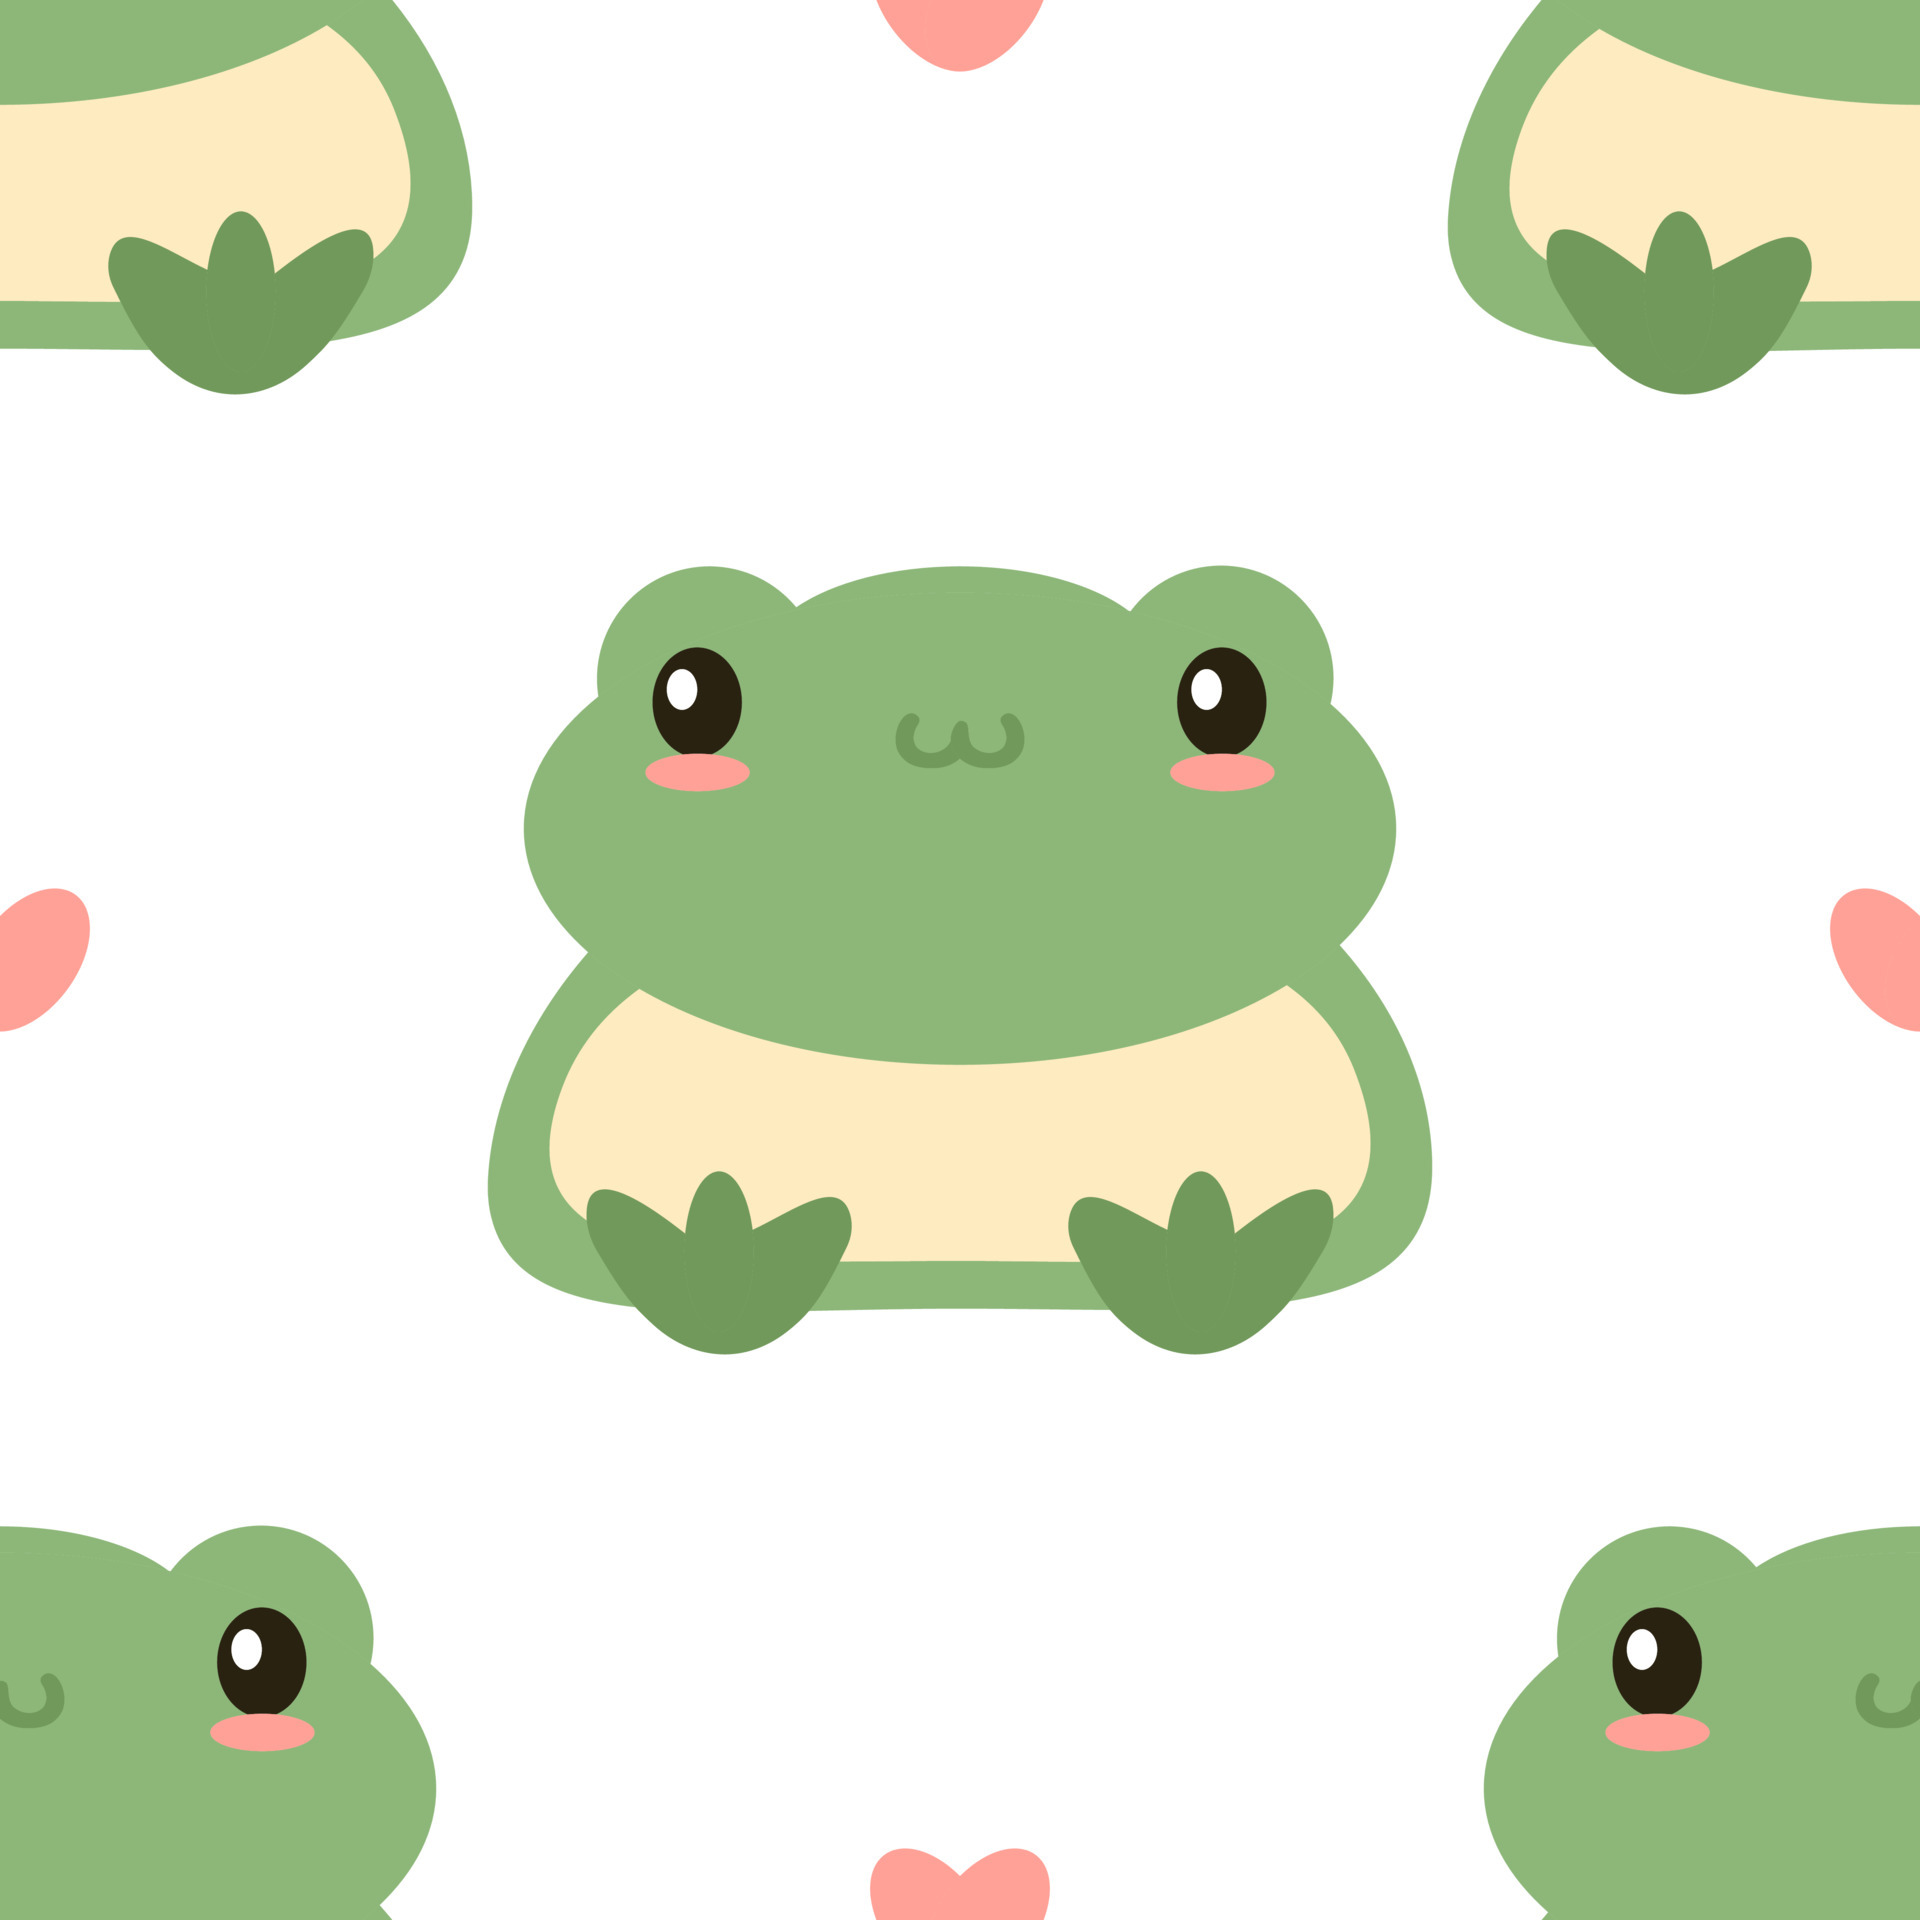 420 Frog HD Wallpapers and Backgrounds